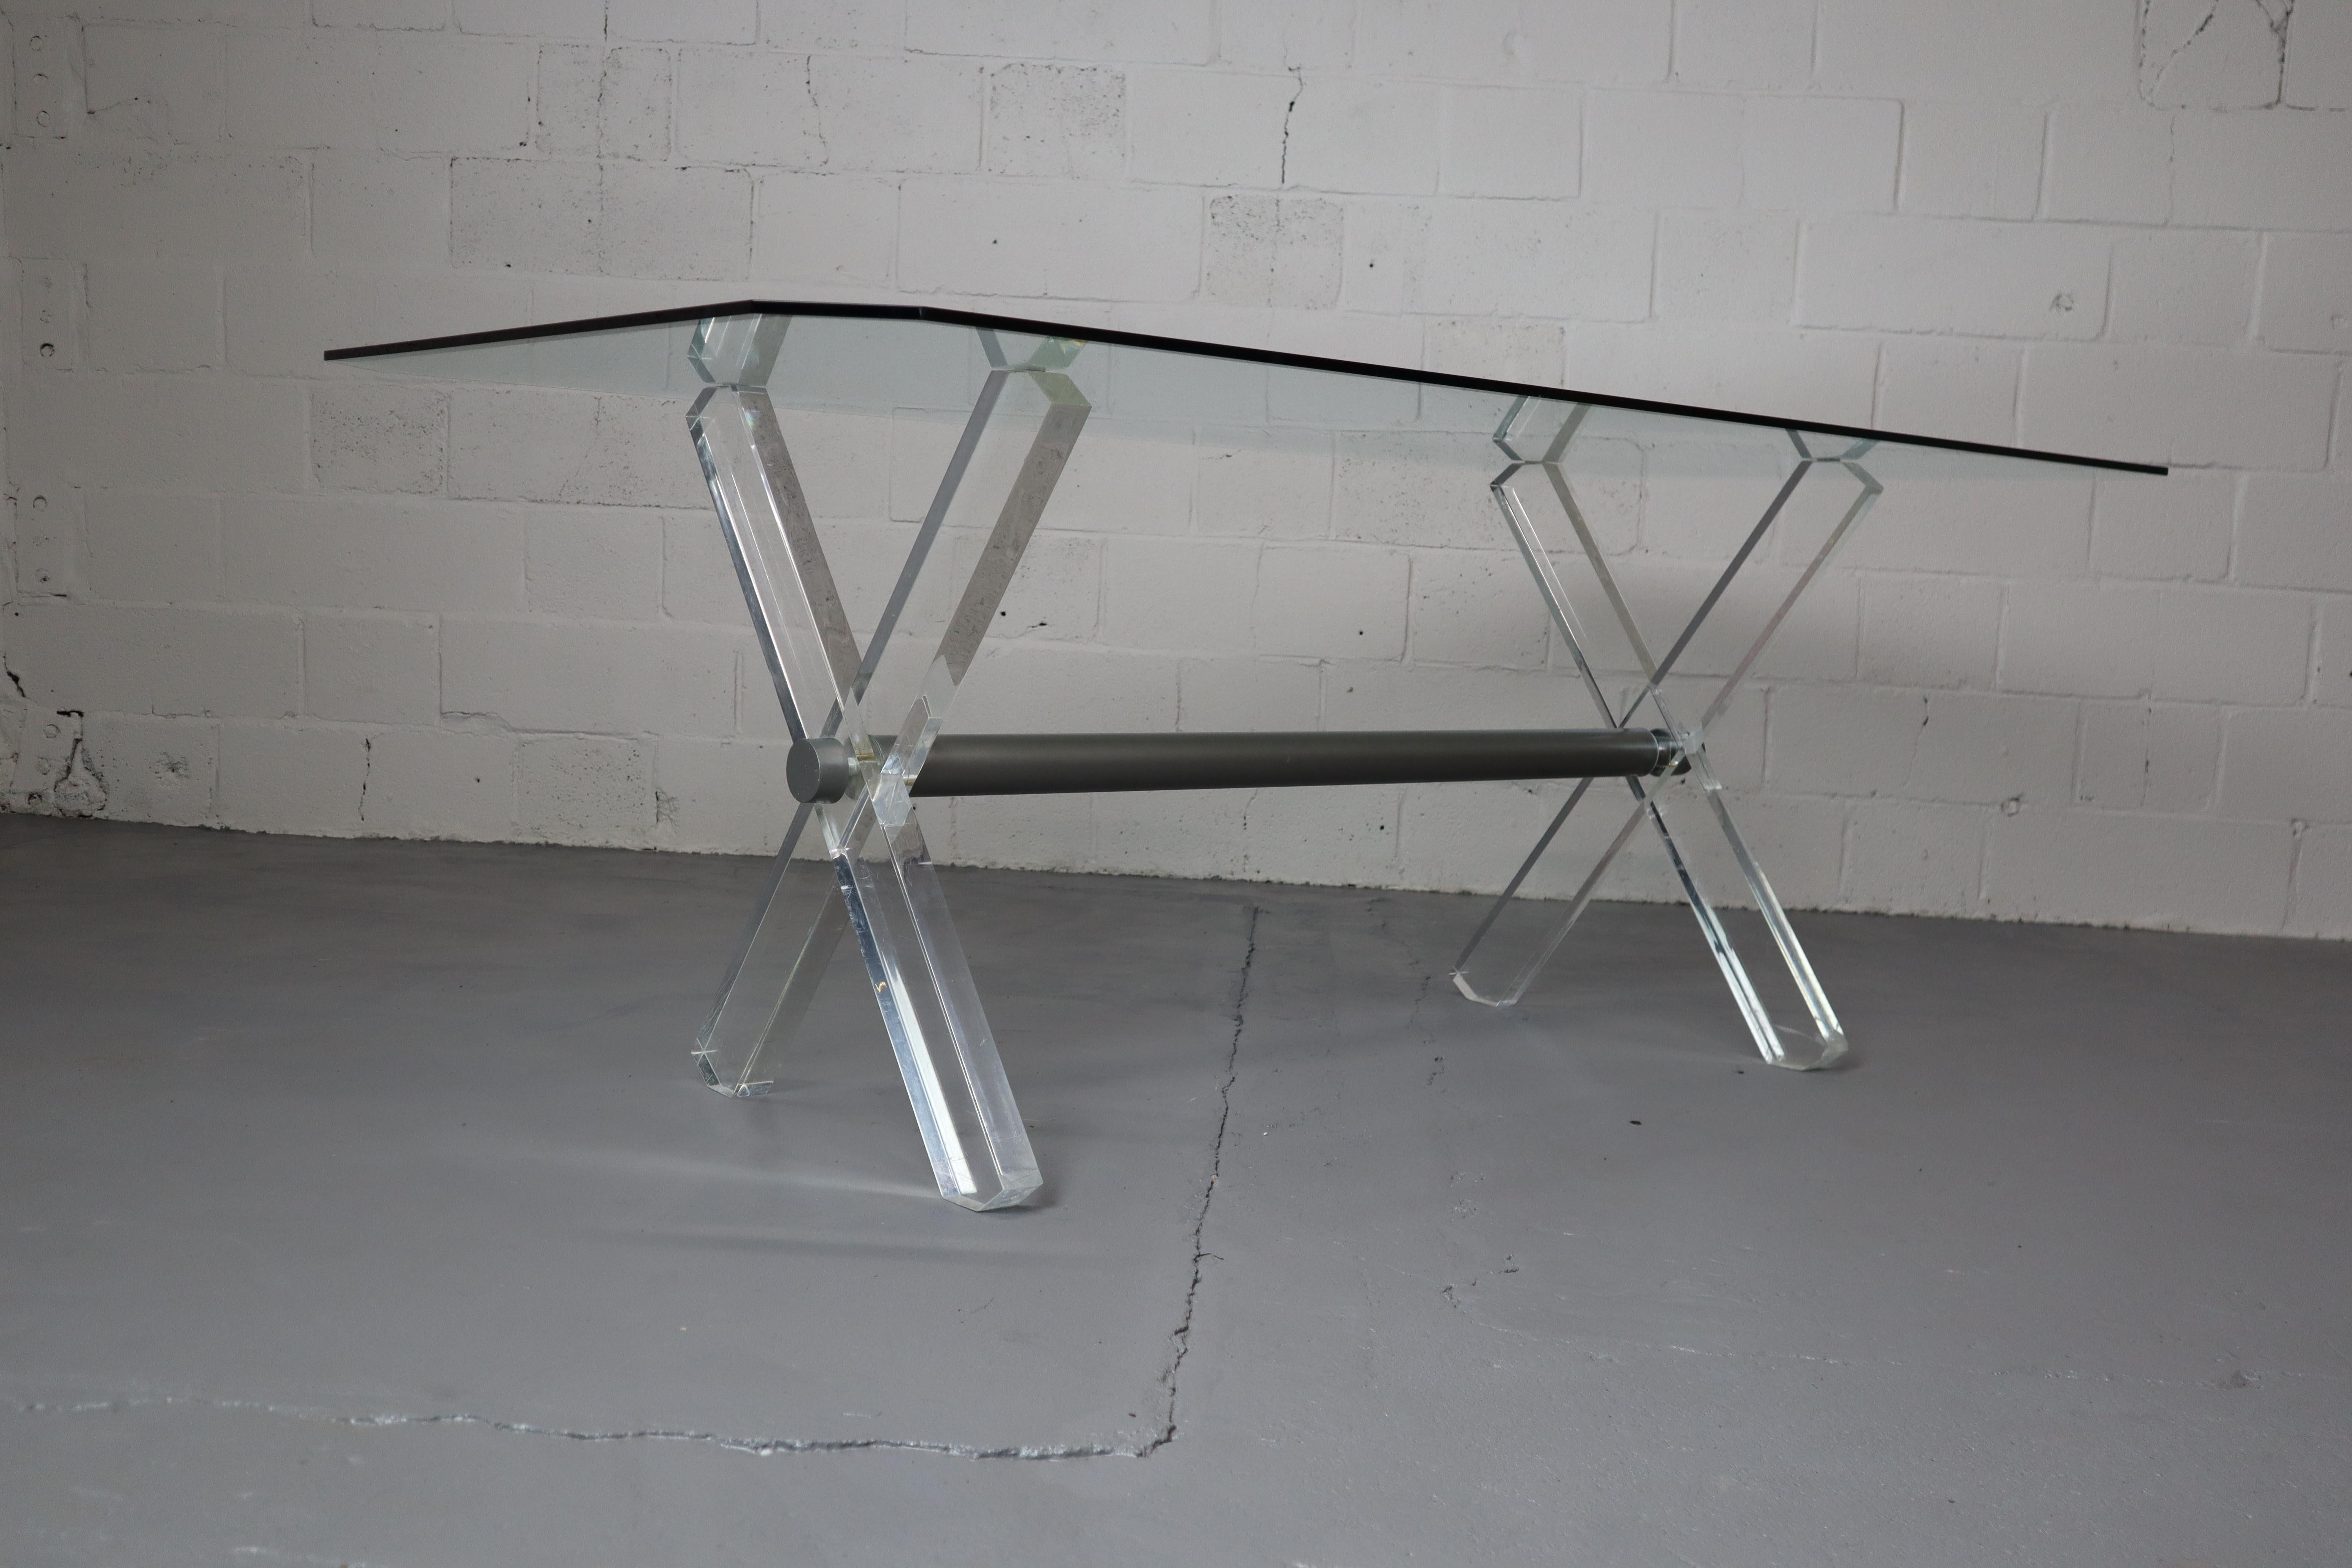 Vintage dining table with plexiglass base and glass top. Beveled rectangular glass top.
190x100x74 cm. 
Some signs of wear on top and base.